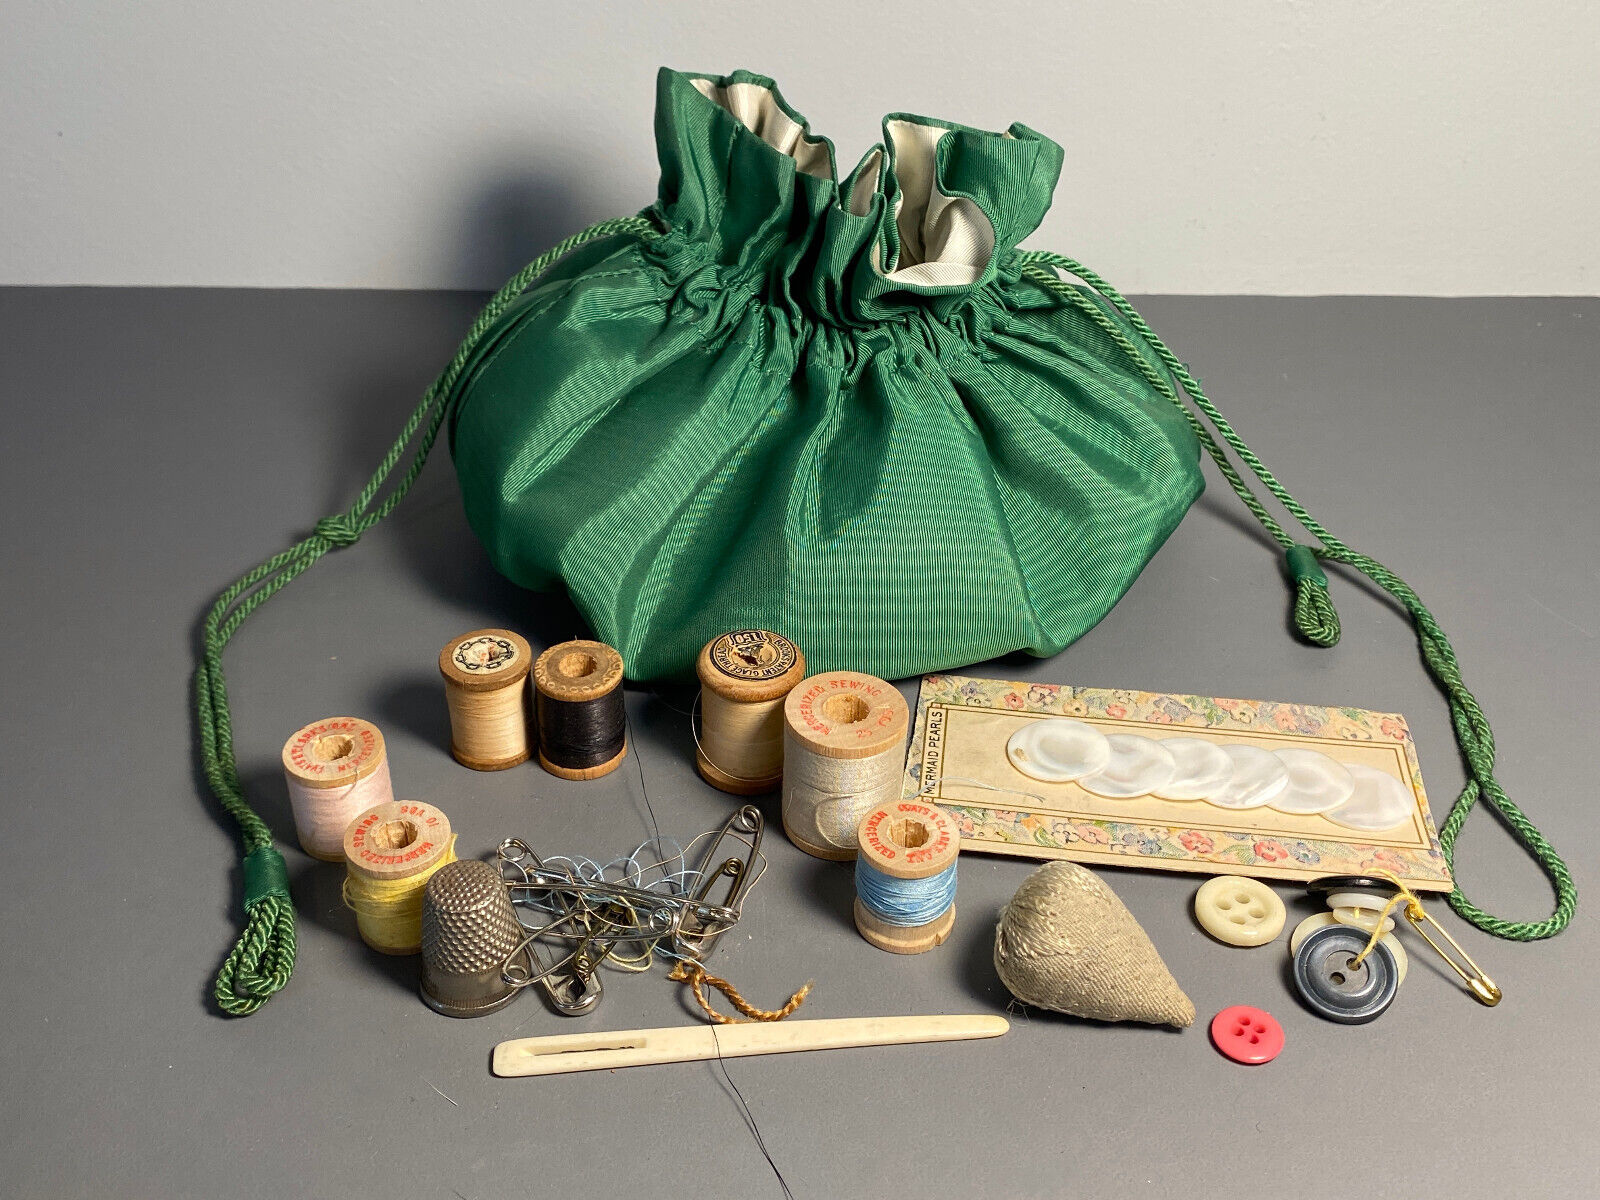 Sweet Antique Early Vintage Sewing Reticule Bag Kit Pin Cushion Sewing Items